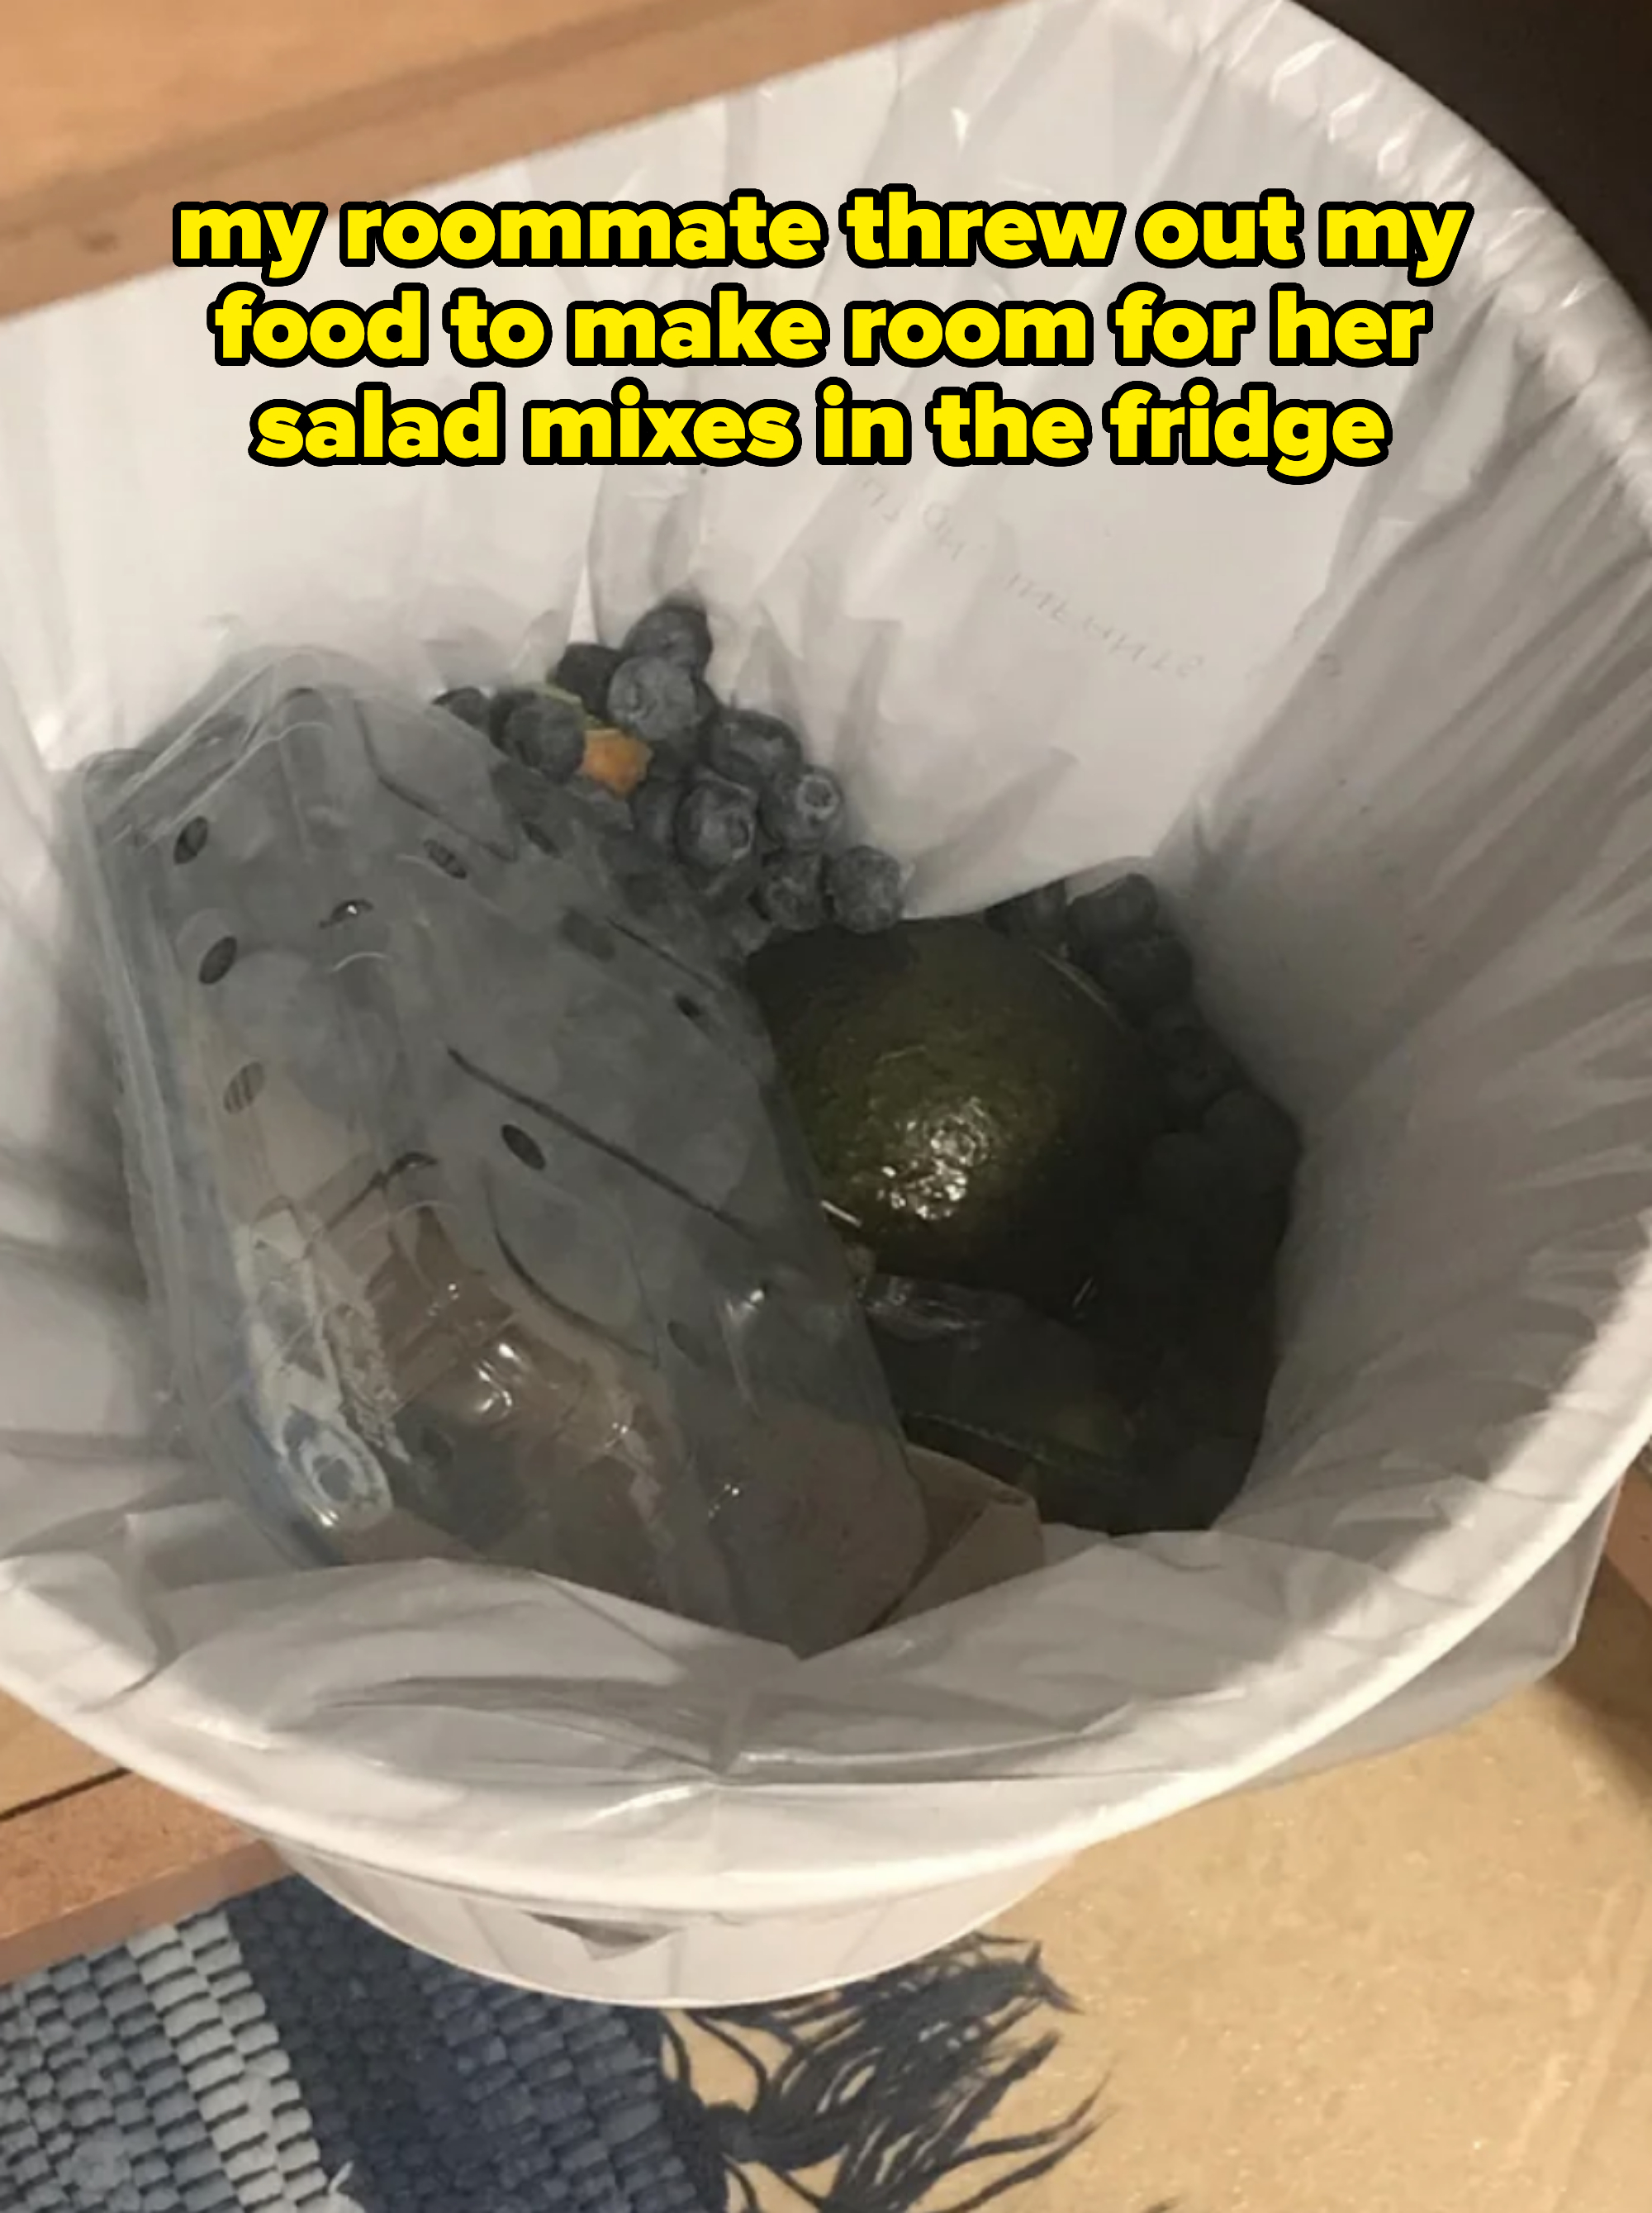 molded food in the trash